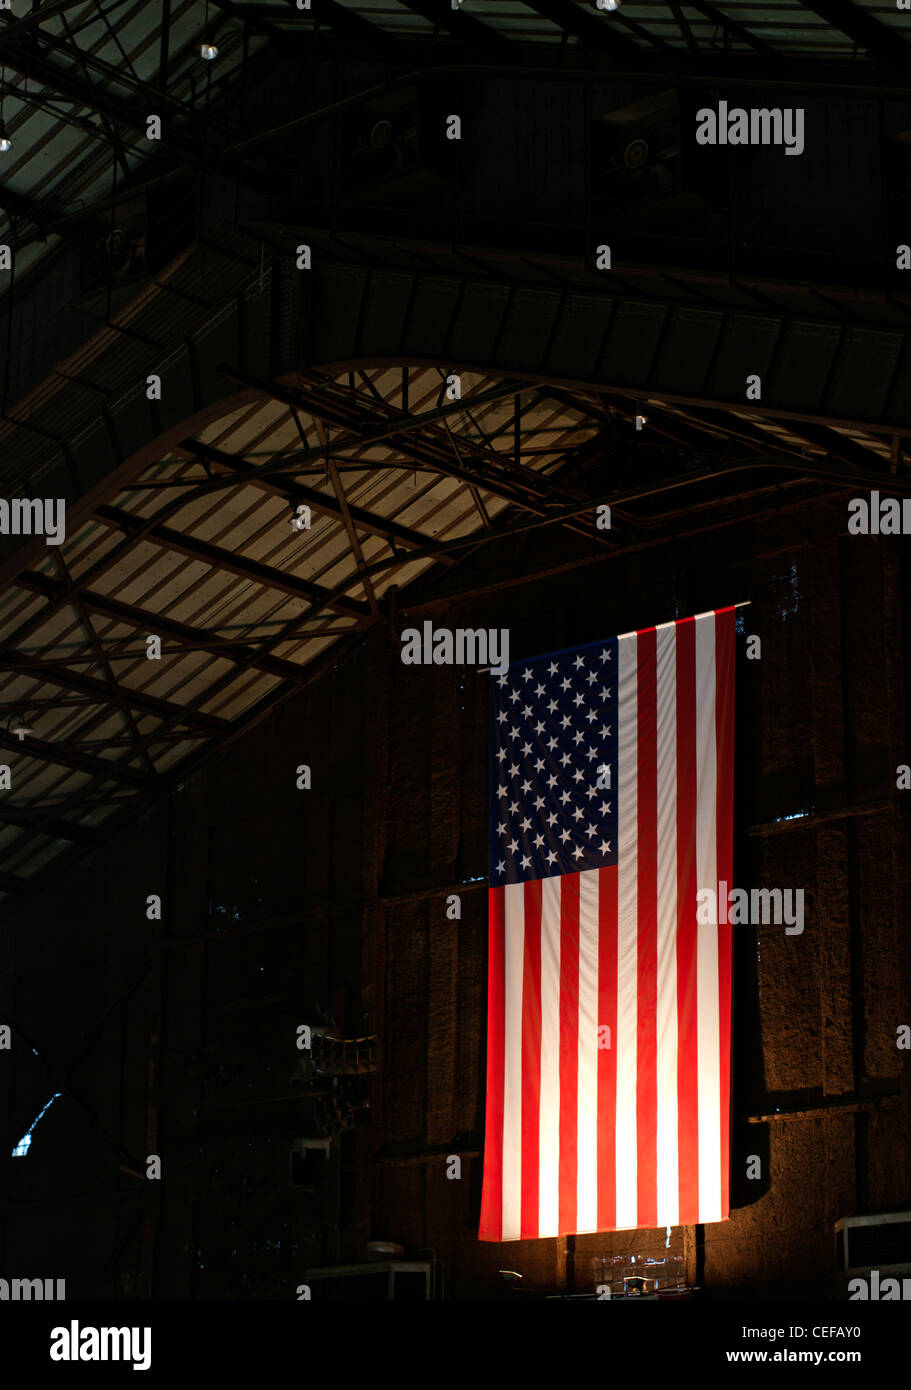 US flag at Indianapolis state fair grounds Stock Photo